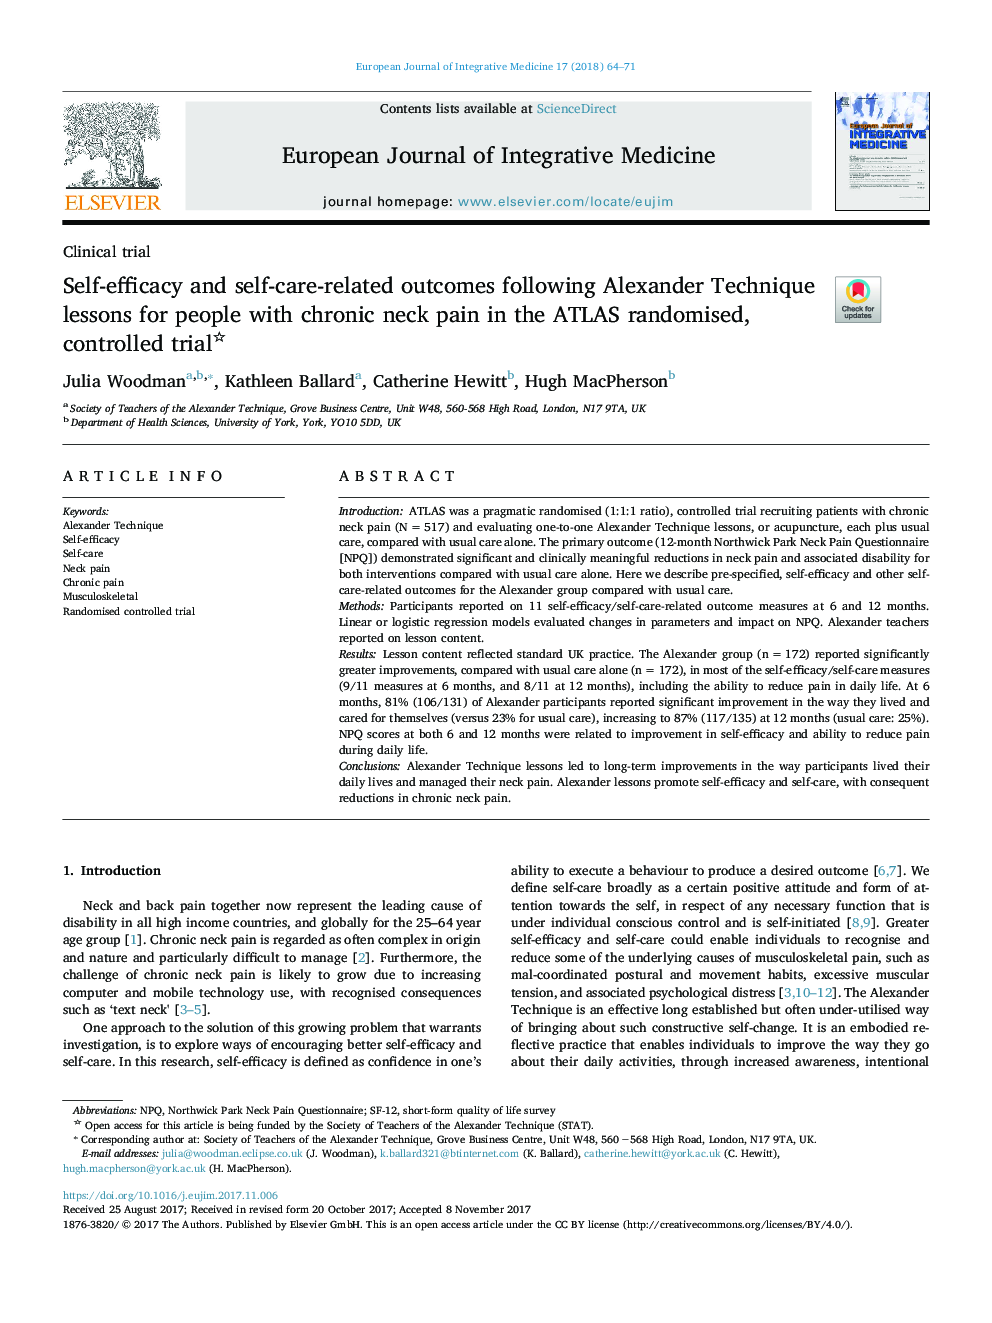 Self-efficacy and self-care-related outcomes following Alexander Technique lessons for people with chronic neck pain in the ATLAS randomised, controlled trial